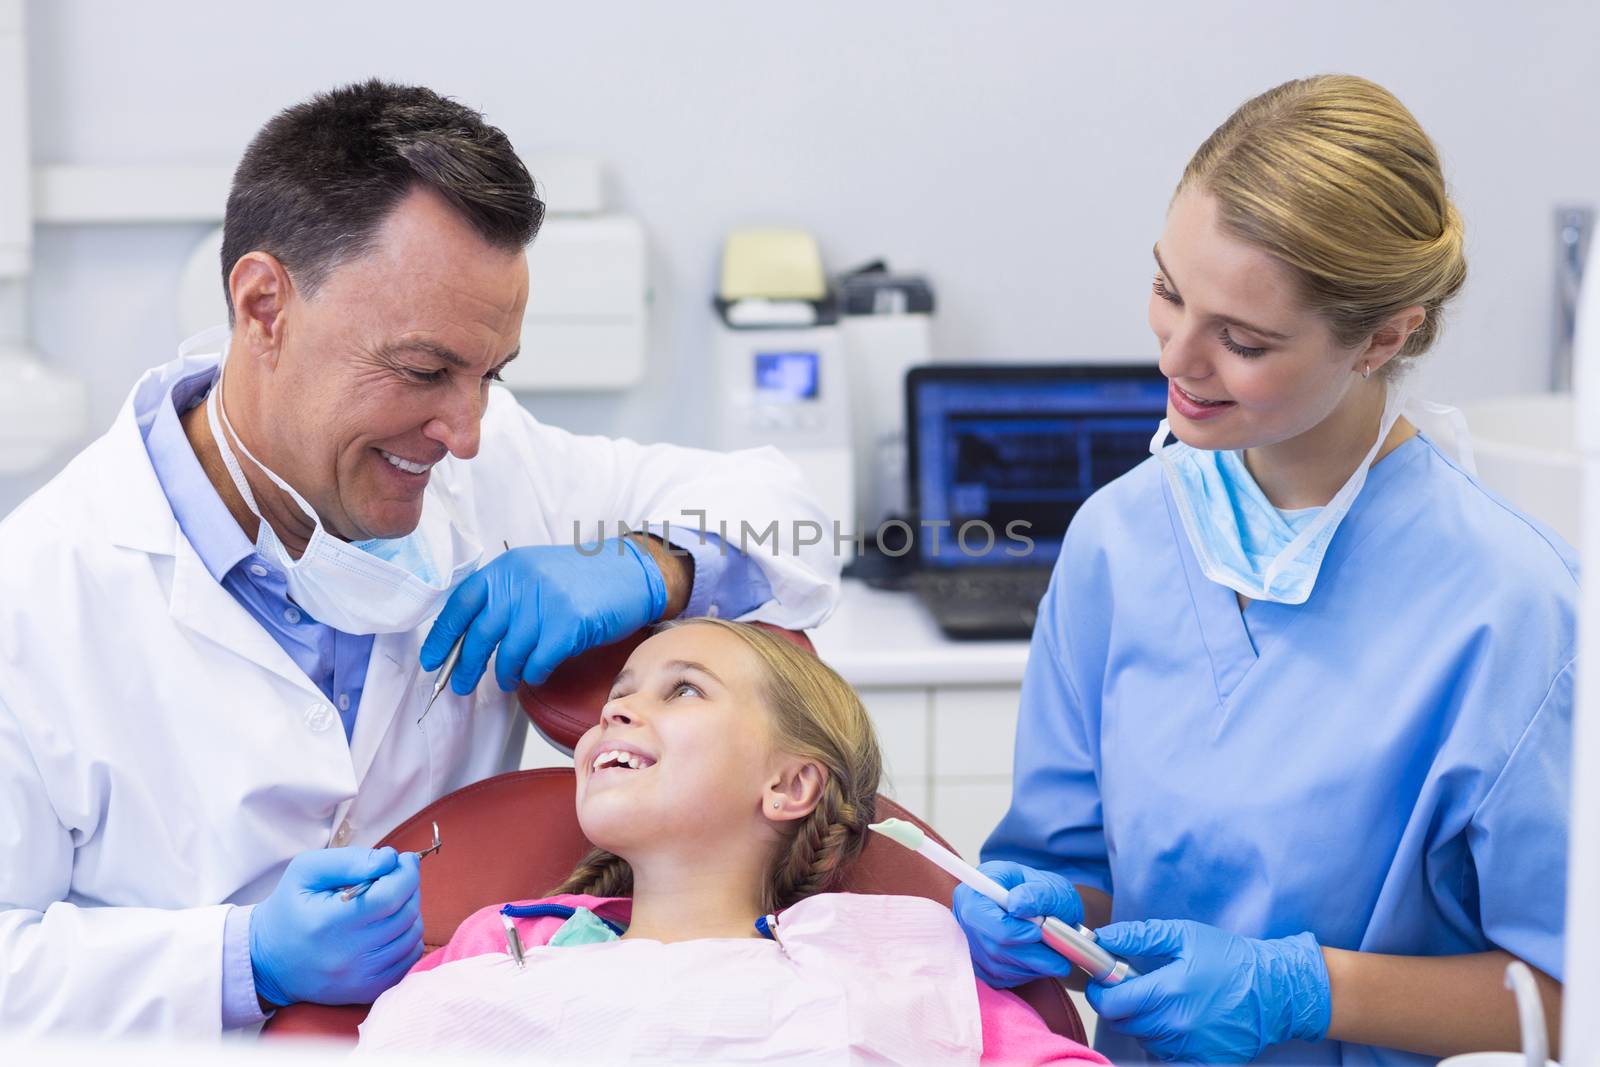 Dentist and nurse interacting with a young patient by Wavebreakmedia